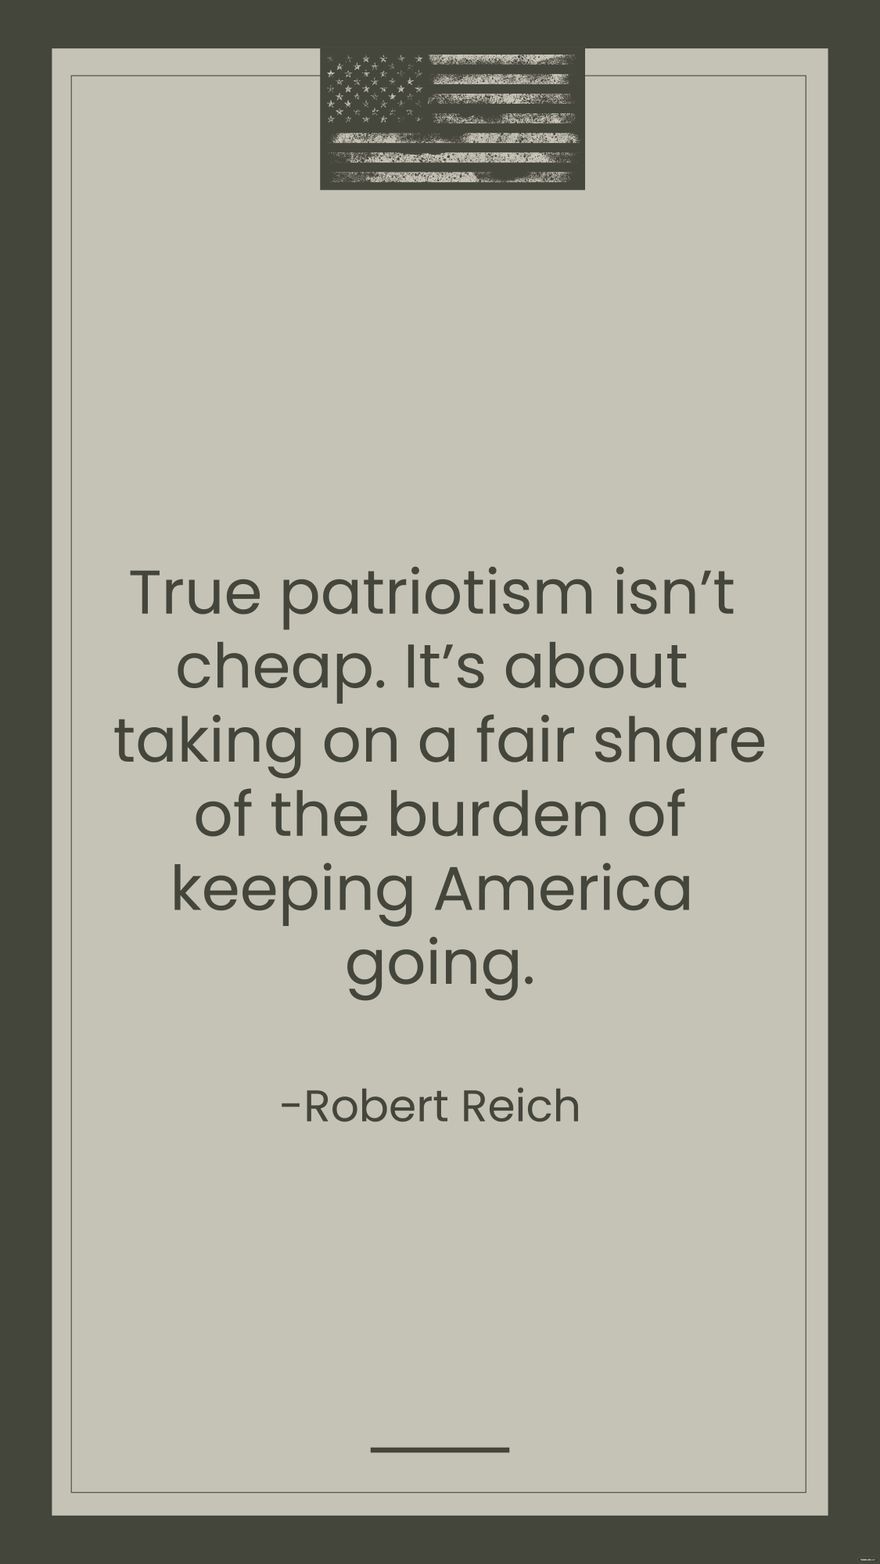 Free  Robert Reich - True patriotism isn't cheap. It's about taking on a fair share of the burden of keeping America going.